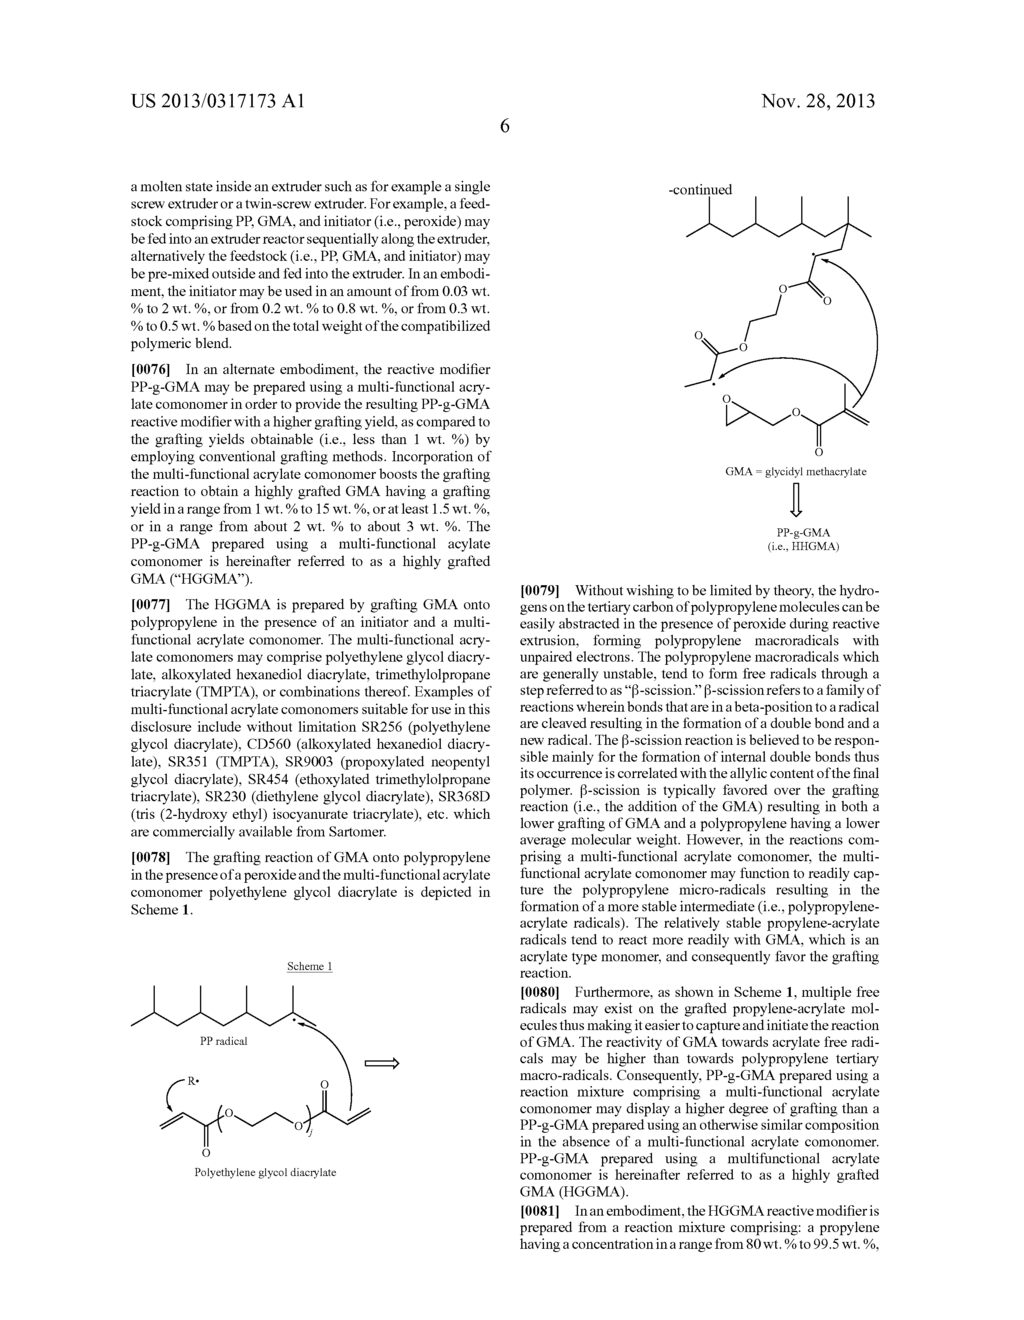 COMPATIBILIZED POLYPROPYLENE HETEROPHASIC COPOLYMER AND POLYLACTIC ACID     BLENDS FOR INJECTION MOLDING APPLICATIONSCOMPATIBILIZED POLYPROPYLENE     HETEROPHASIC COPOLYMER AND POLYLACTIC ACID BLENDS FOR INJECTION MOLDING     APPLICATIONS - diagram, schematic, and image 13